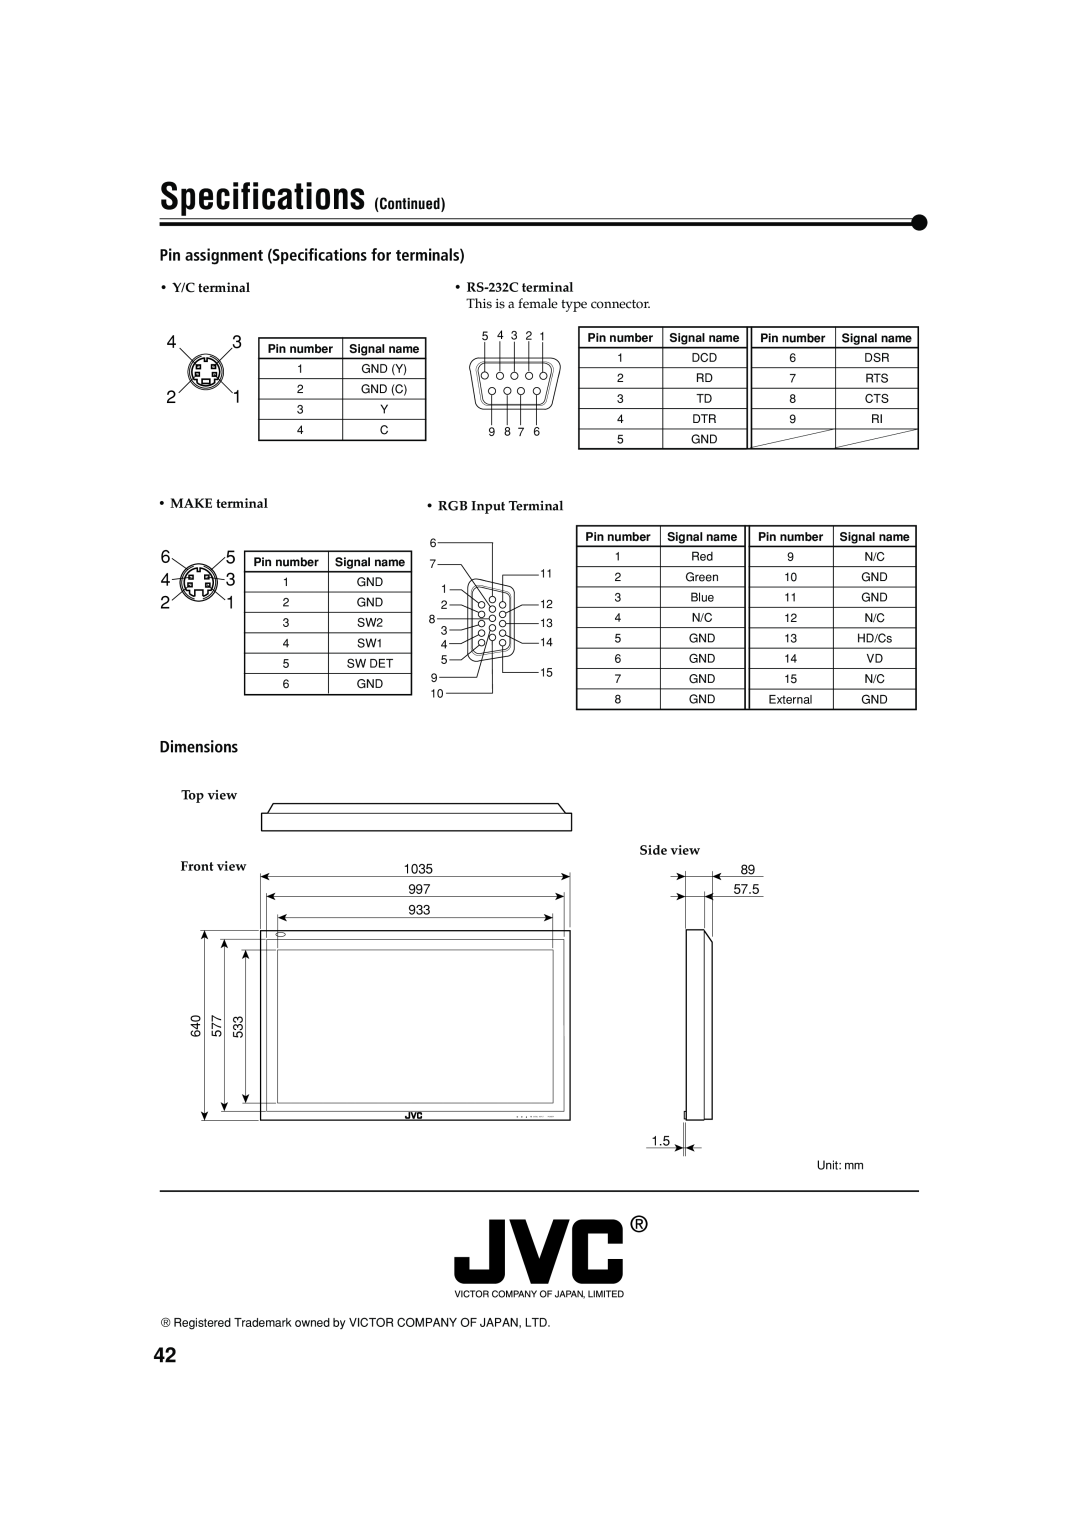 JVC GM-V42C Specifications Continued, Pin assignment Specifications for terminals, Dimensions, Pin number, Signal name 